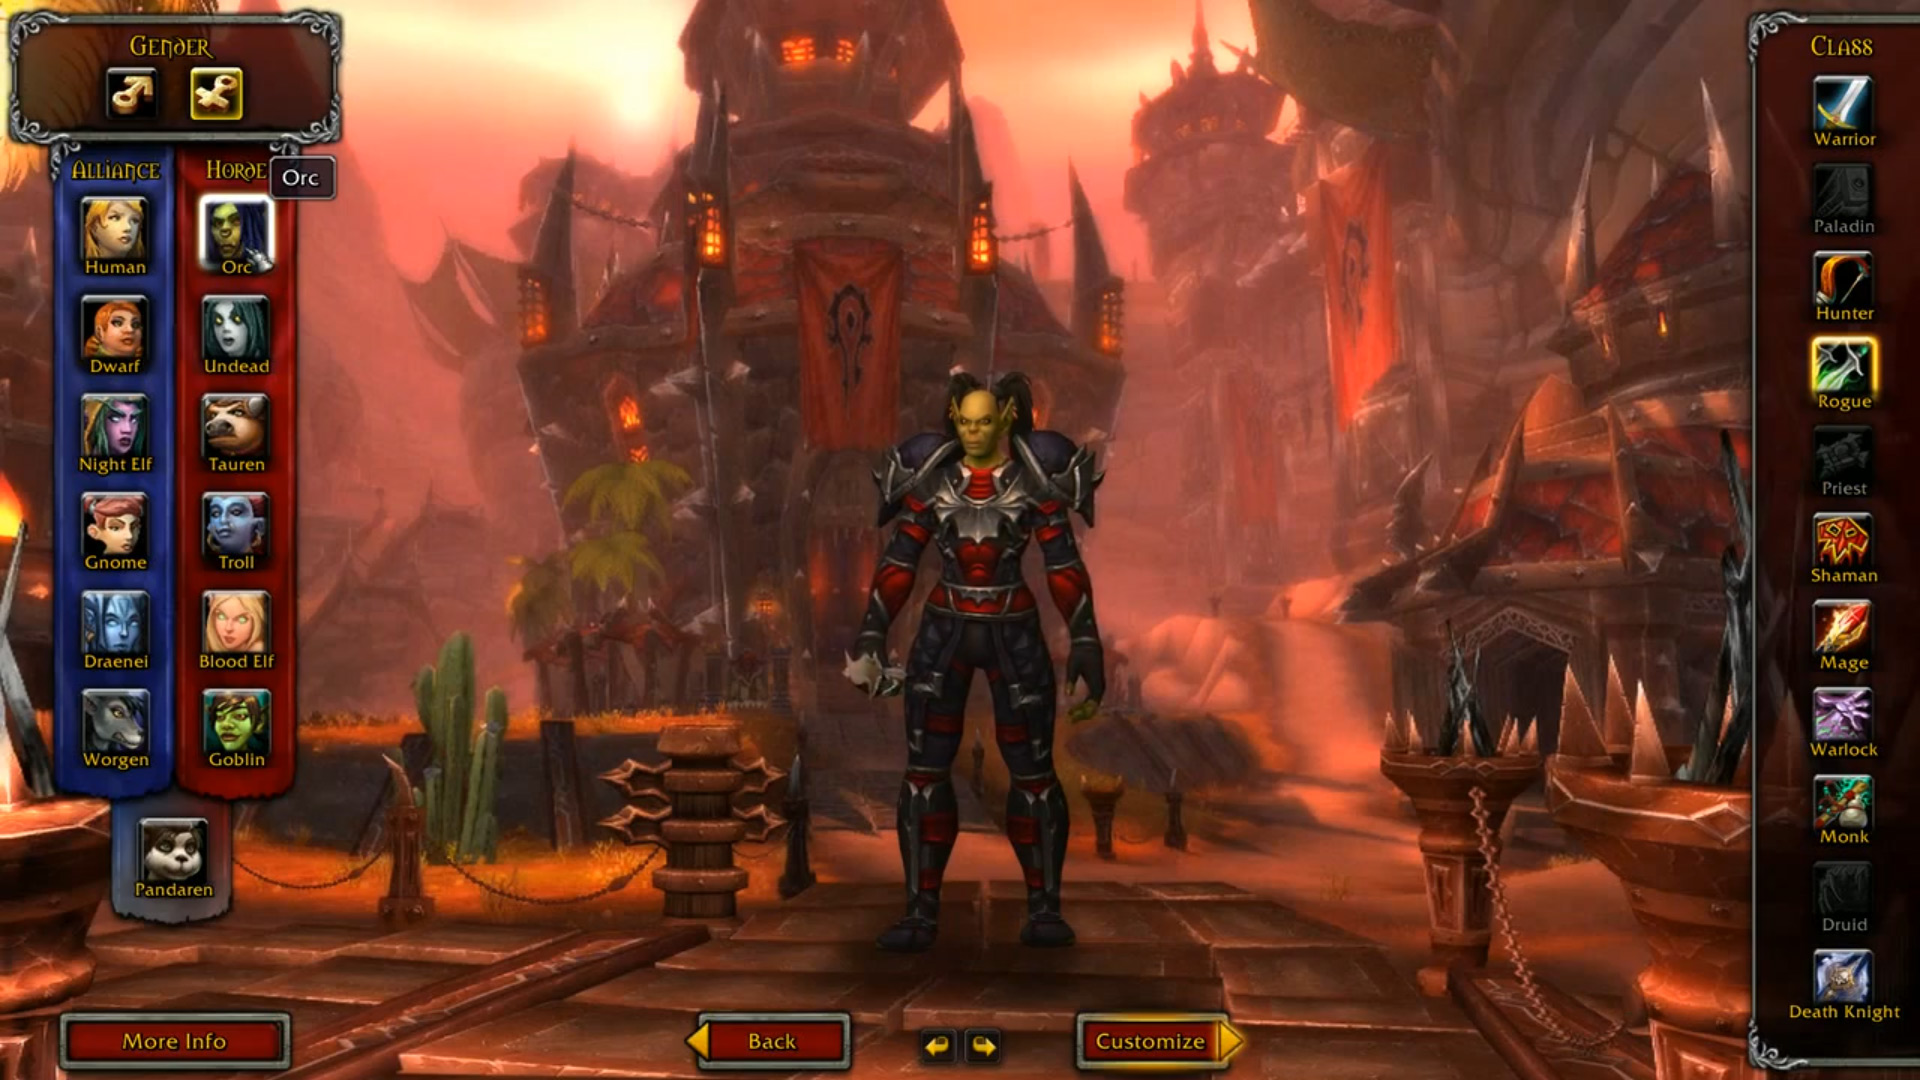 World Of Warcraft: Warlords Of Draenor Backgrounds, Compatible - PC, Mobile, Gadgets| 1920x1080 px